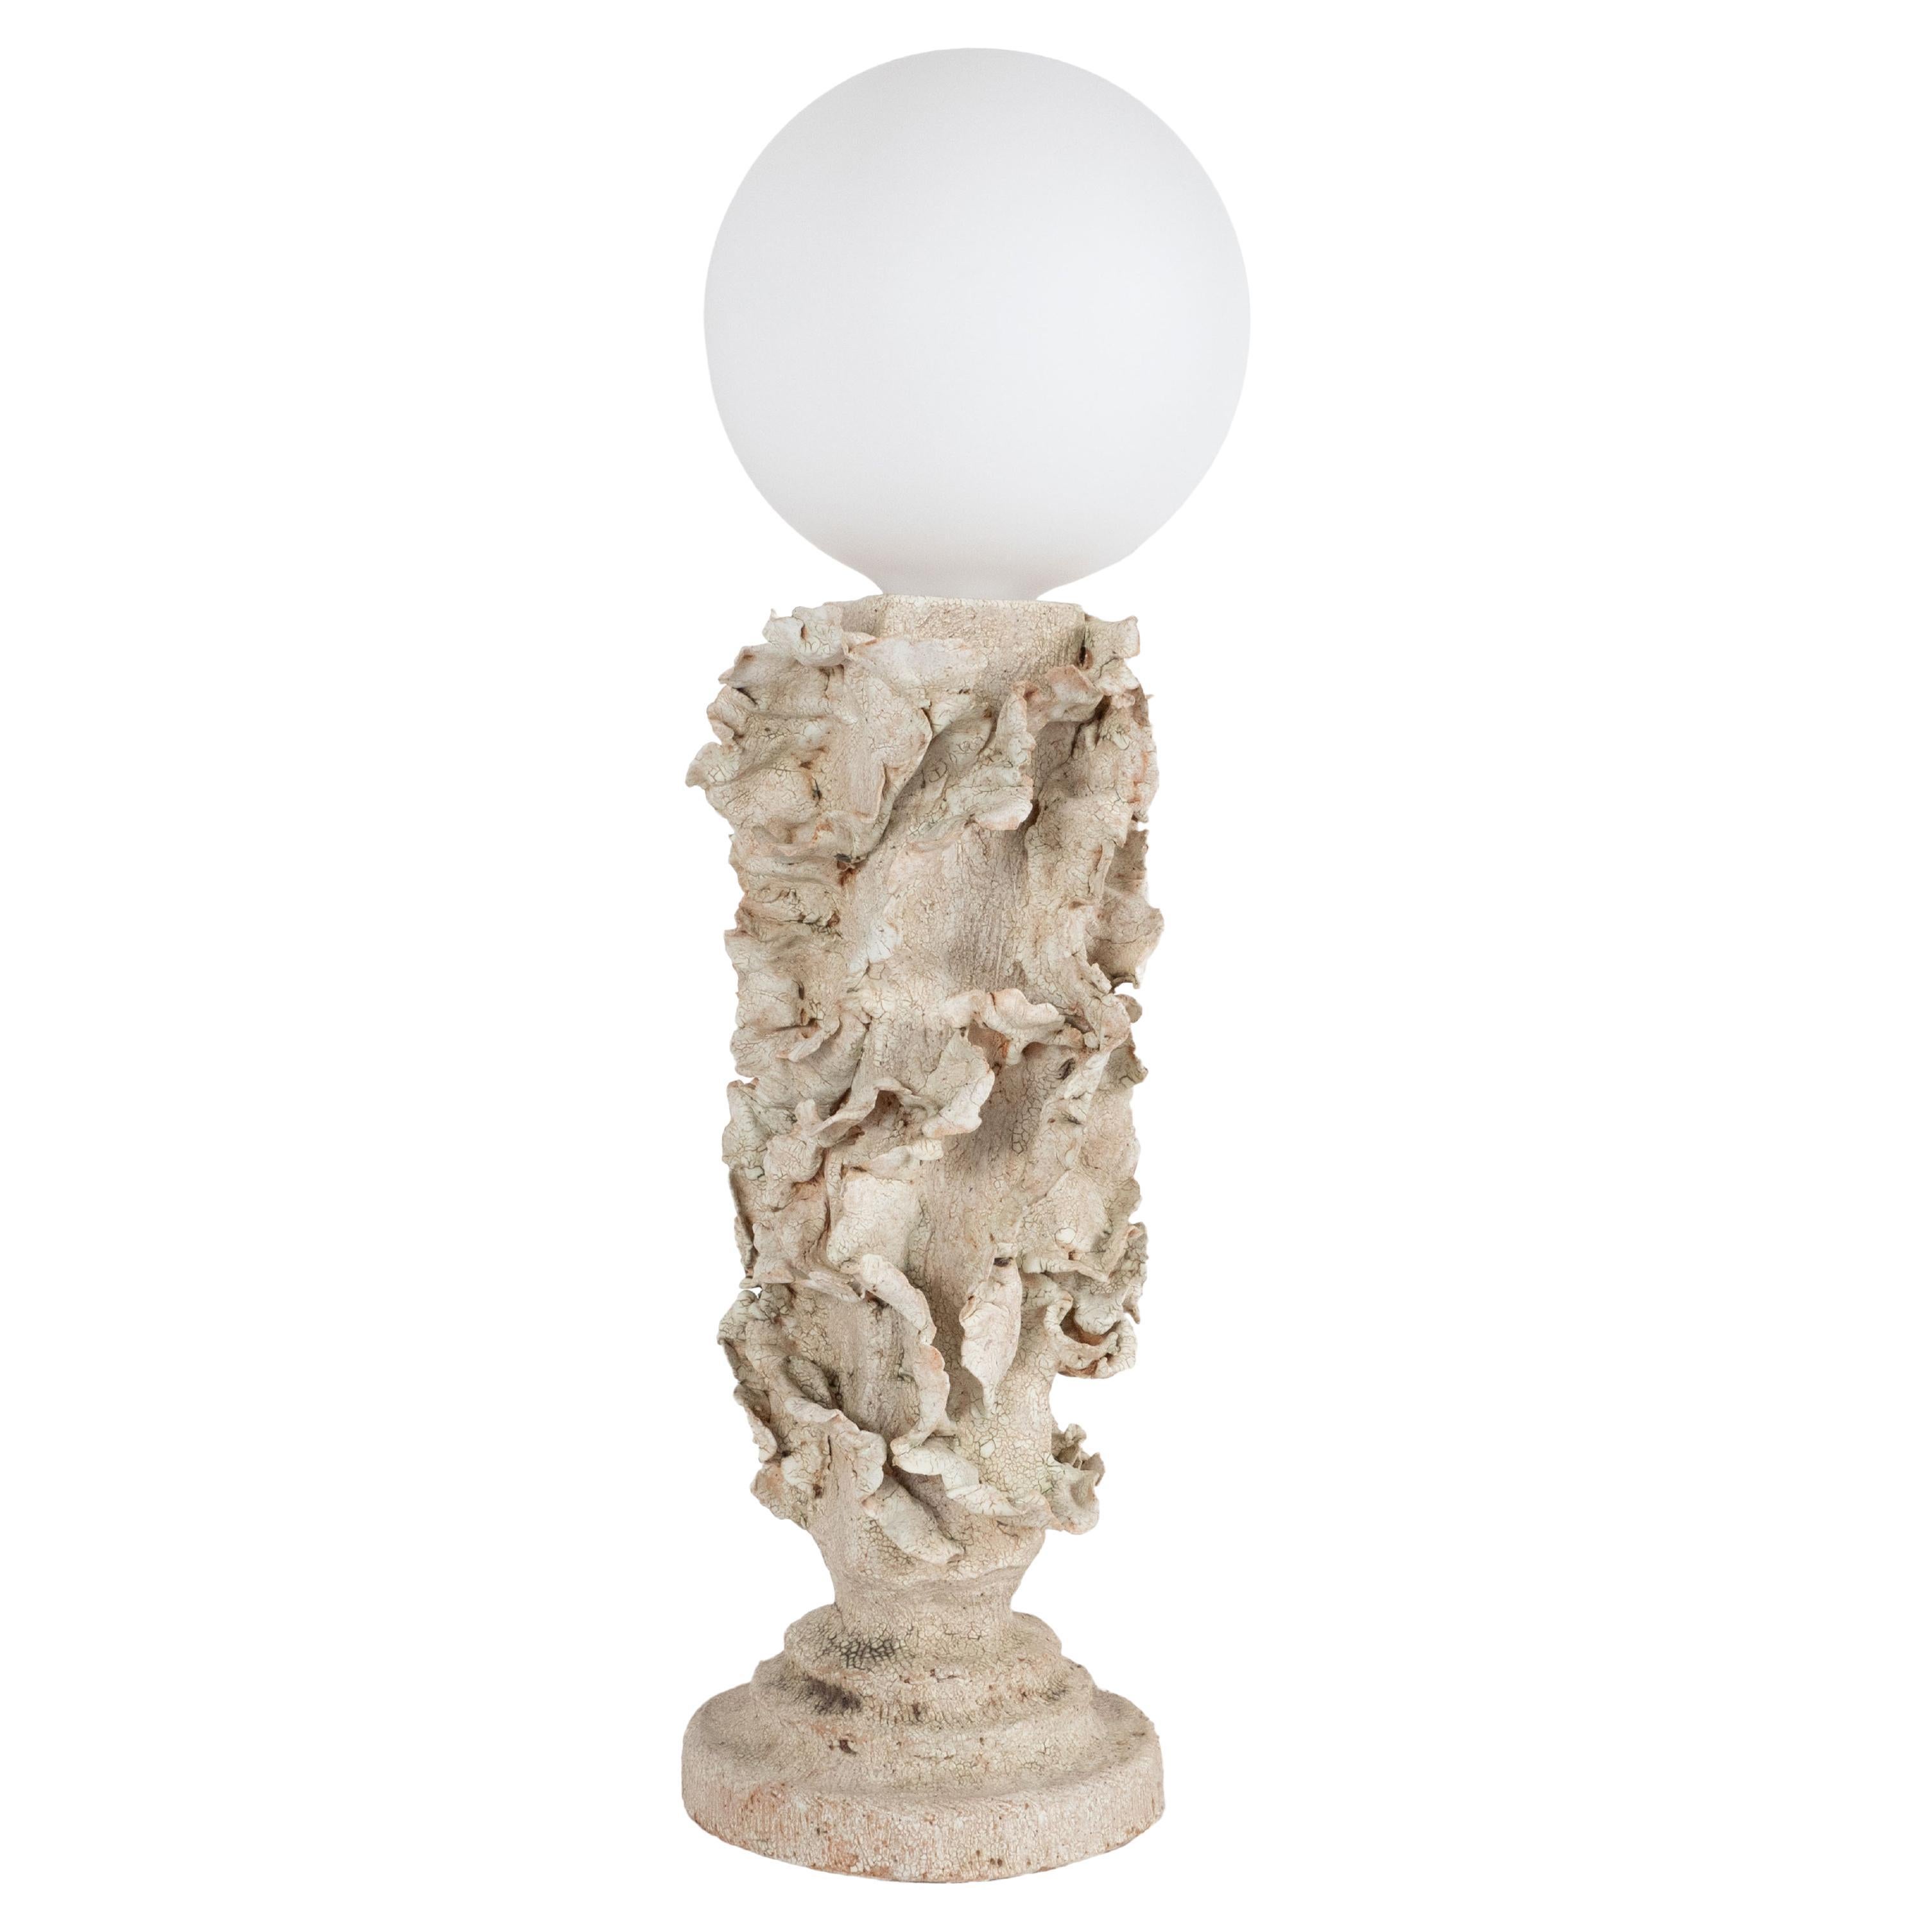 "Reef Lamp #1" Ceramic Table Lamp by a Great Hush